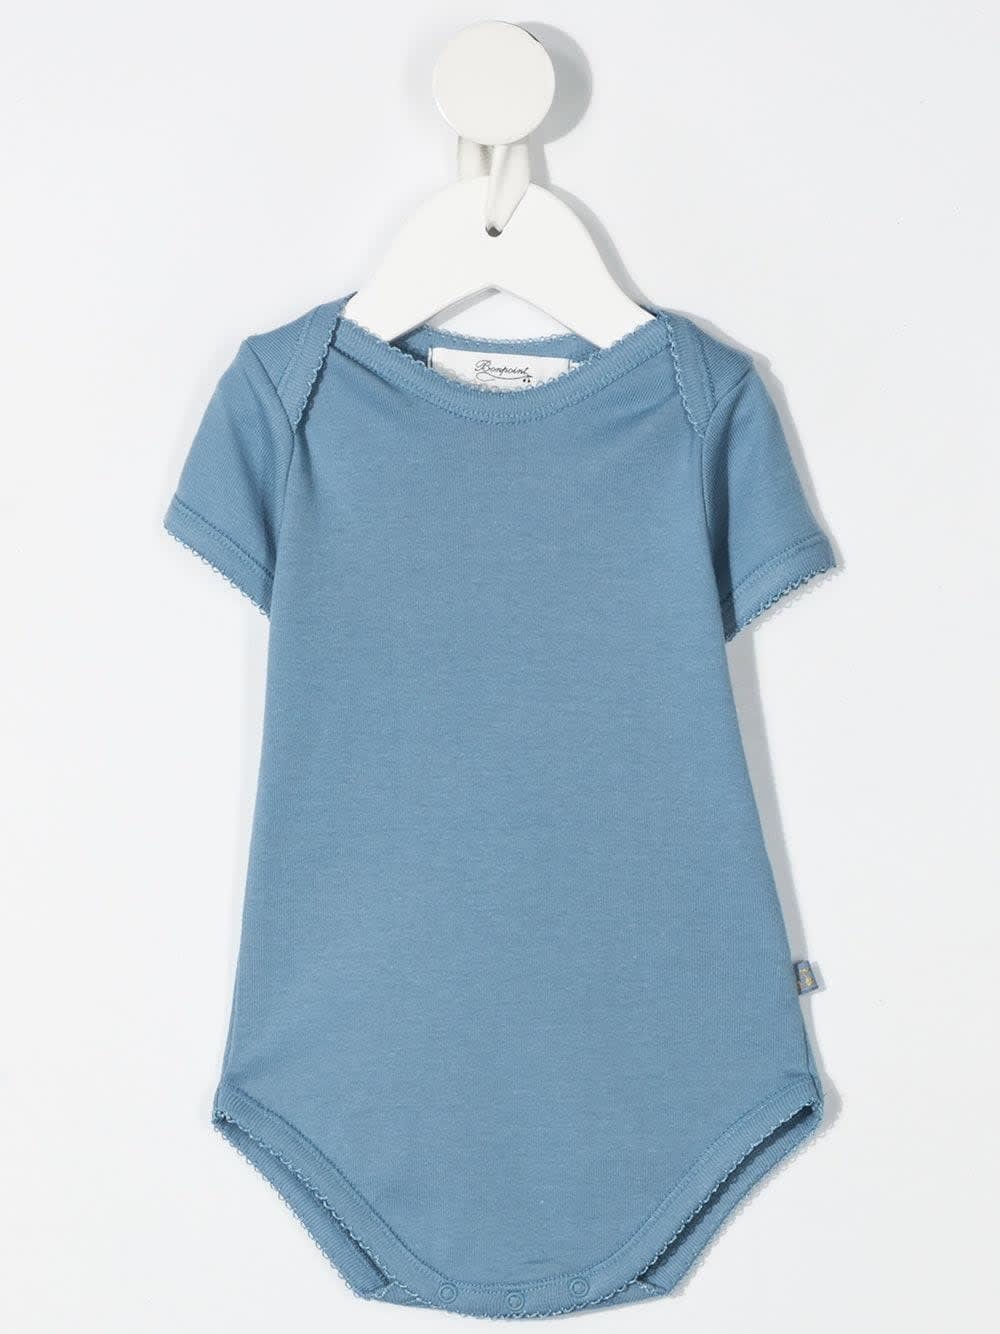 Shop Bonpoint 3 Body Pack In Light Blue And White Cotton